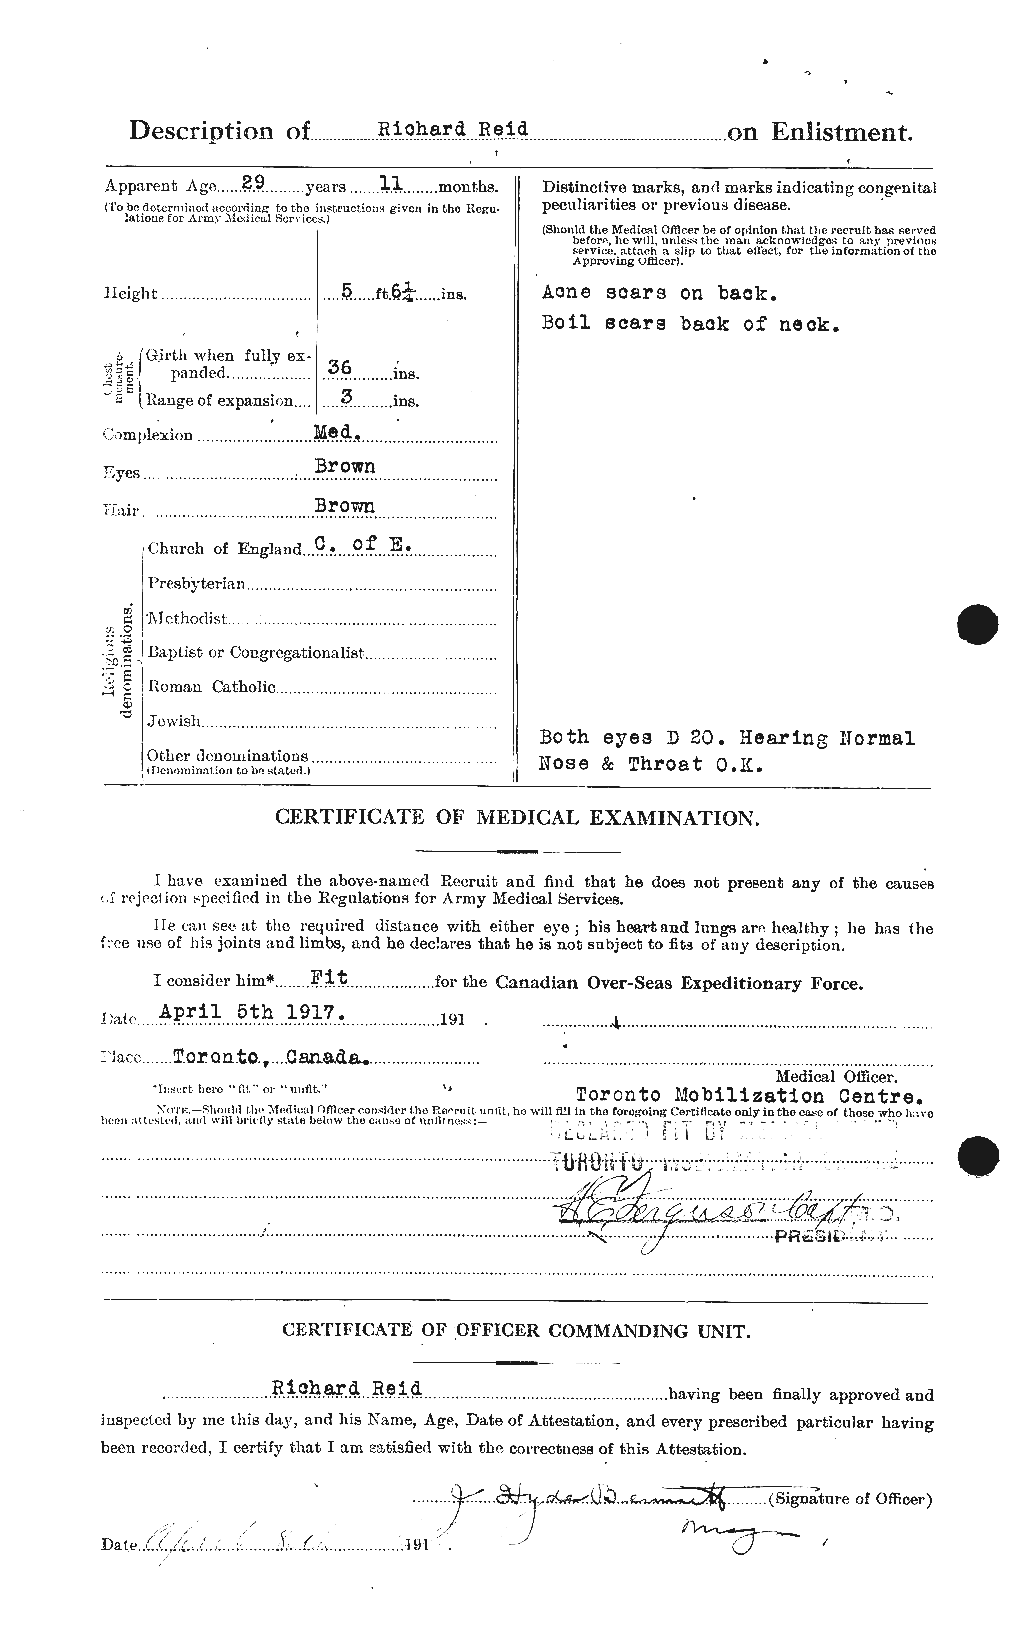 Personnel Records of the First World War - CEF 601857b